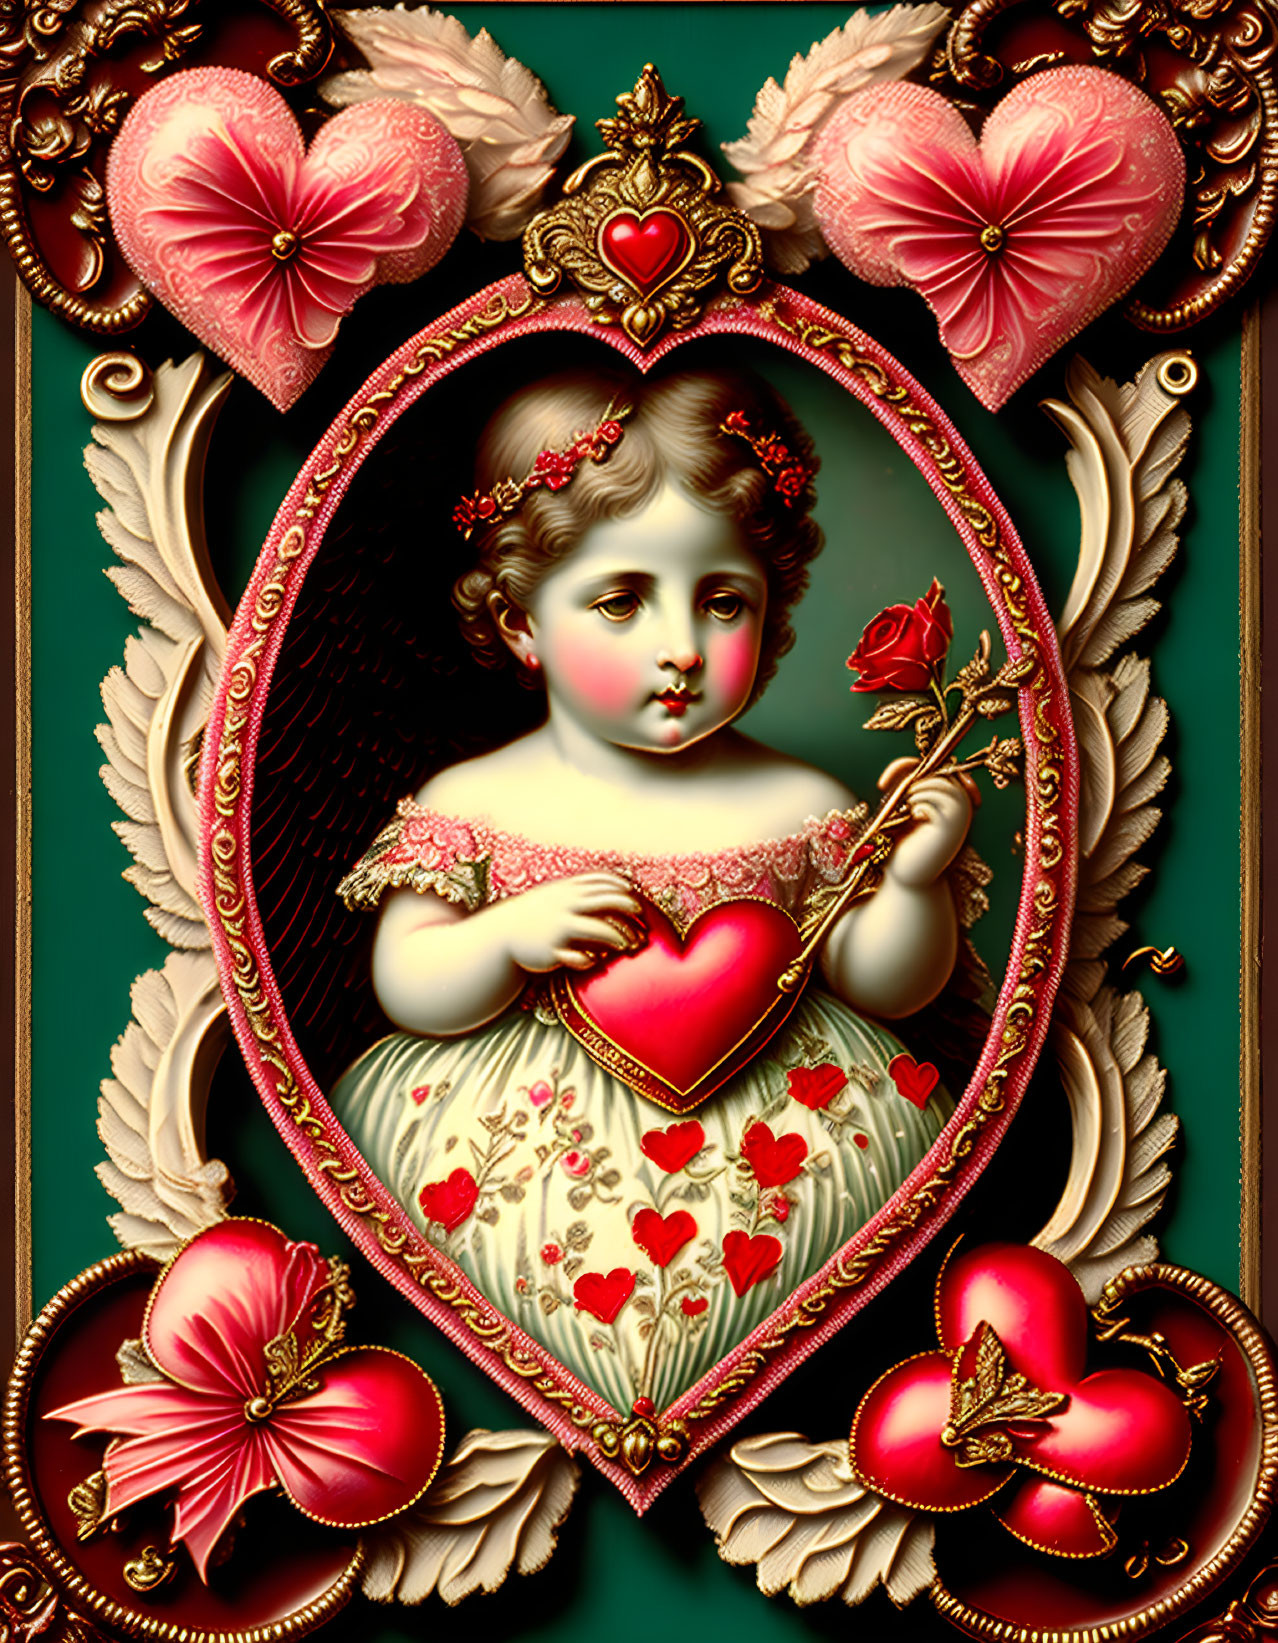 Vintage Illustration: Young Girl with Red Rose in Heart-Shaped Frame